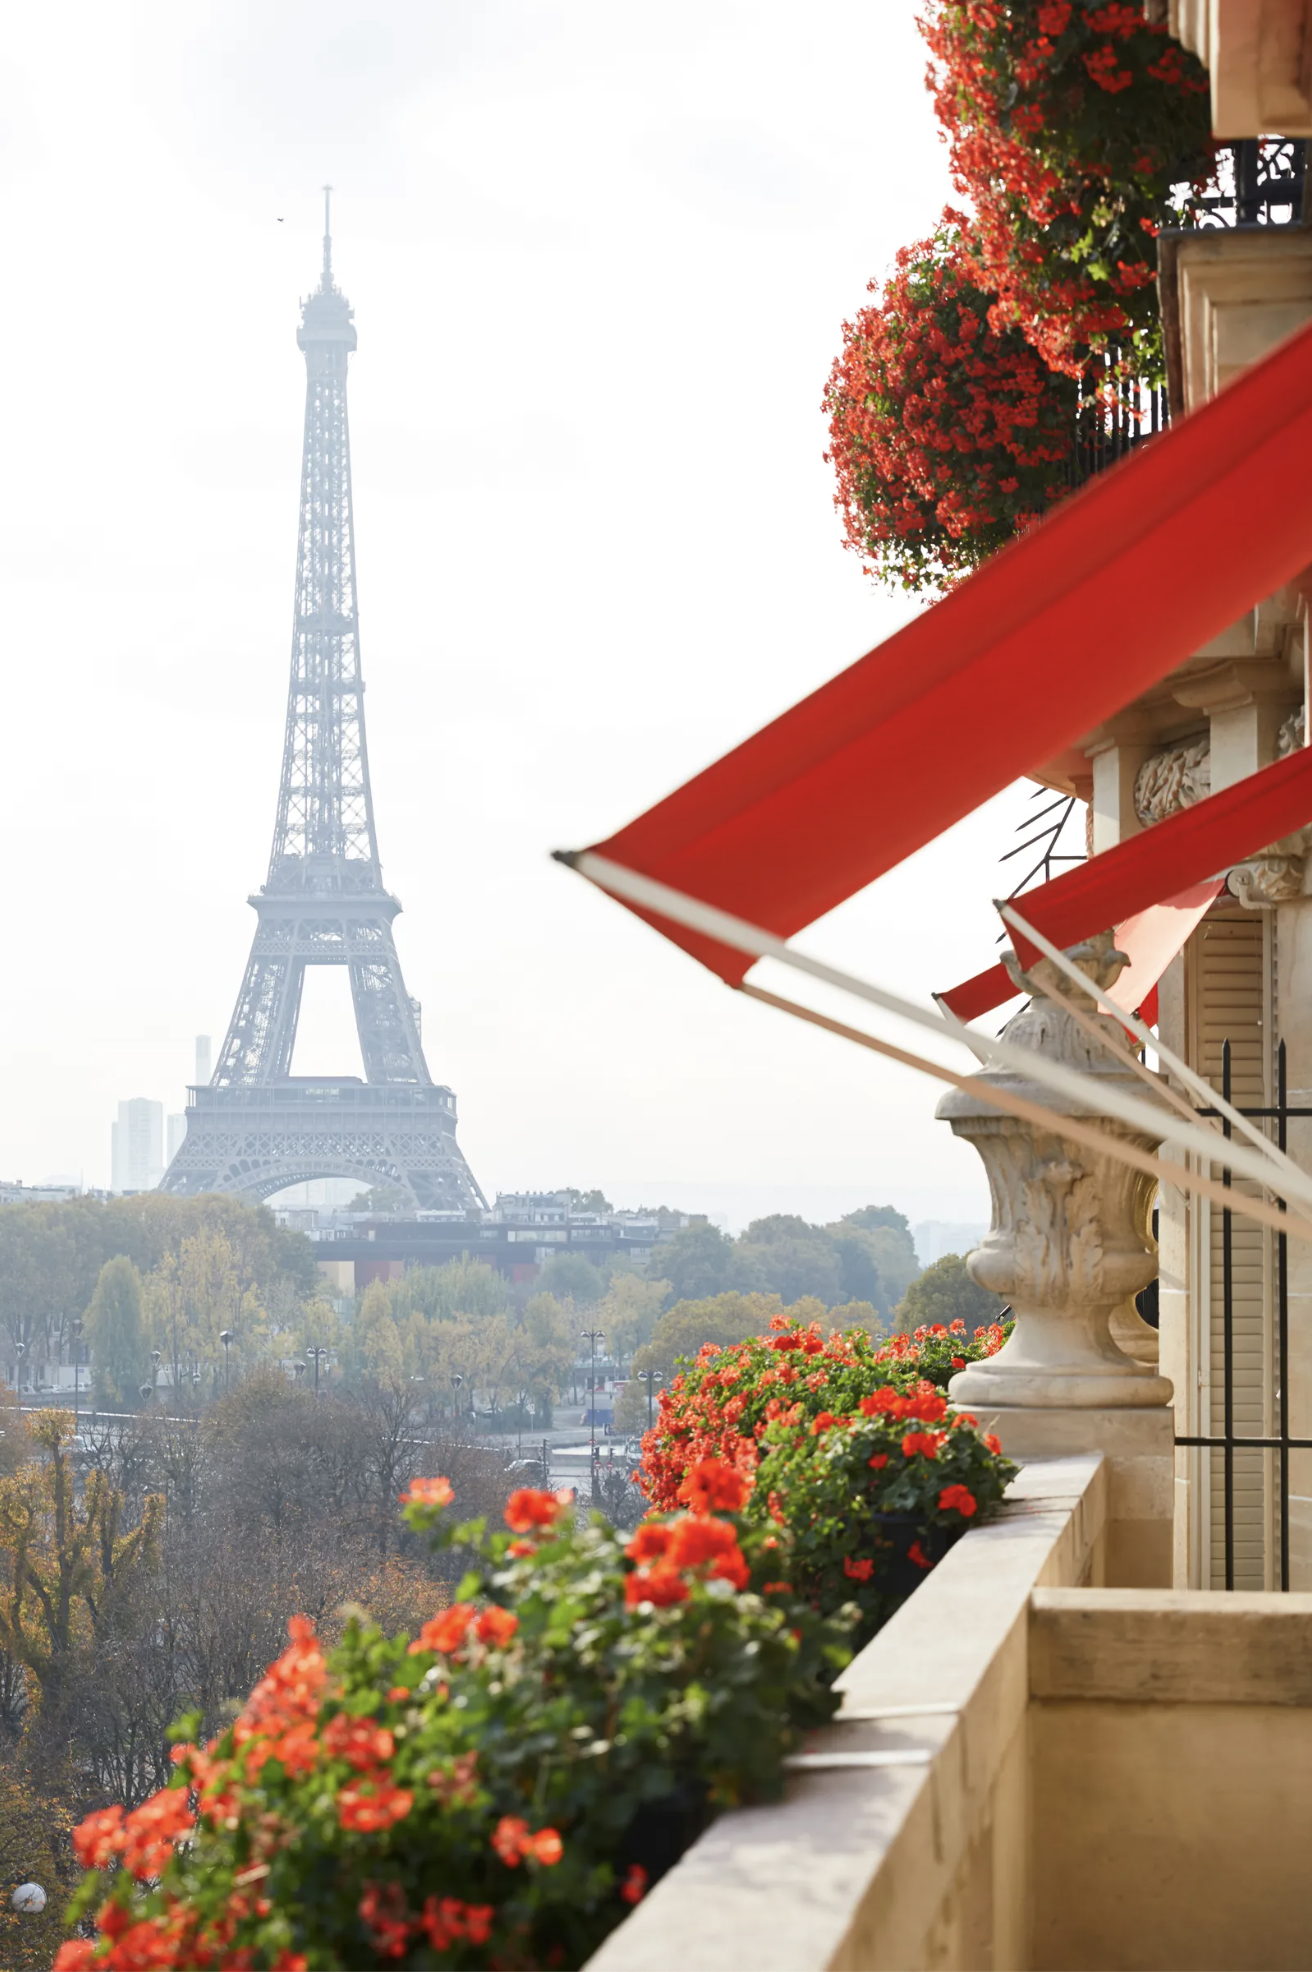 A view of the Eiffel Tower from the balcony of a Royal Suite at Hotel Plaza Athénée